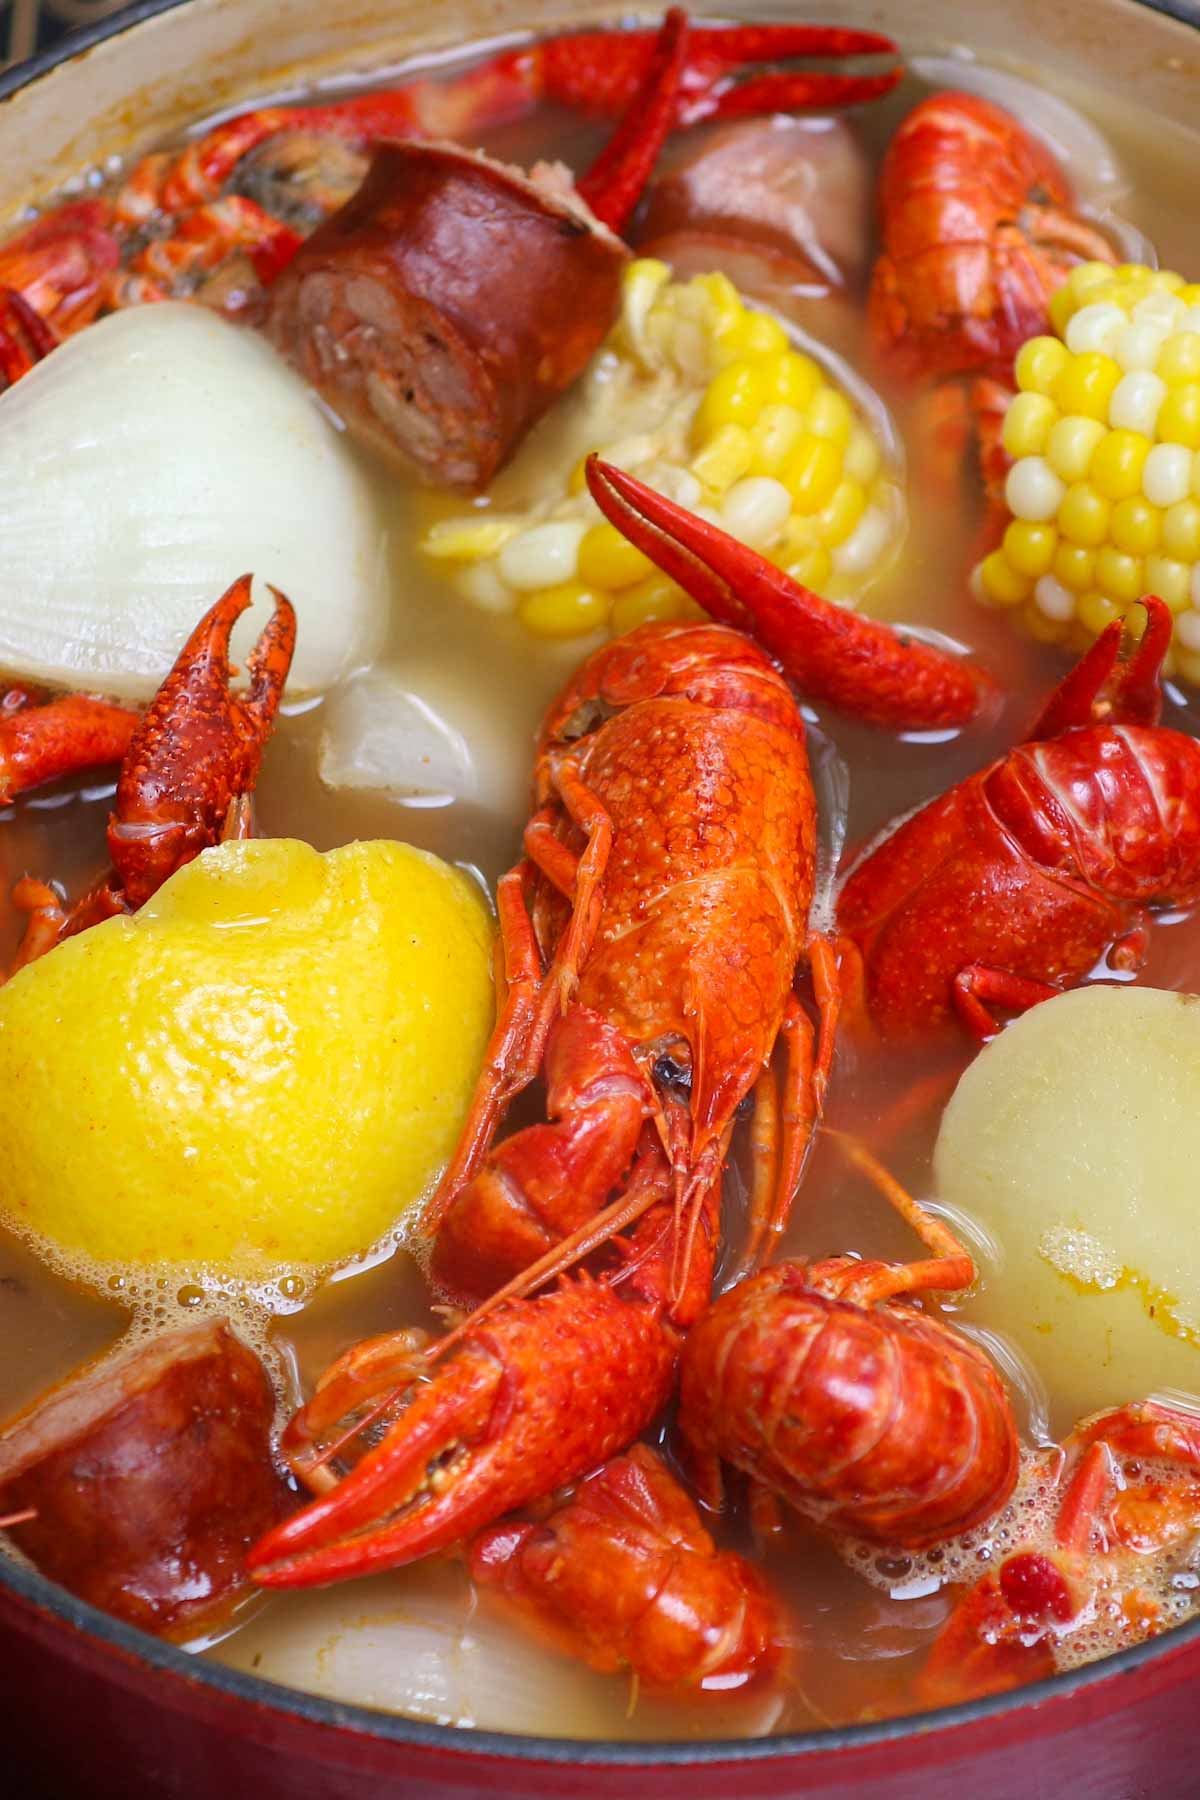 This Louisiana Crawfish Boil contains crawfish, corn, potatoes, and smoked sausage, all boiled in Old Bay seasoning flavored Cajun-style broth. Serve it with the classic seafood garlic butter sauce for the ultimate crawfish boil recipe.